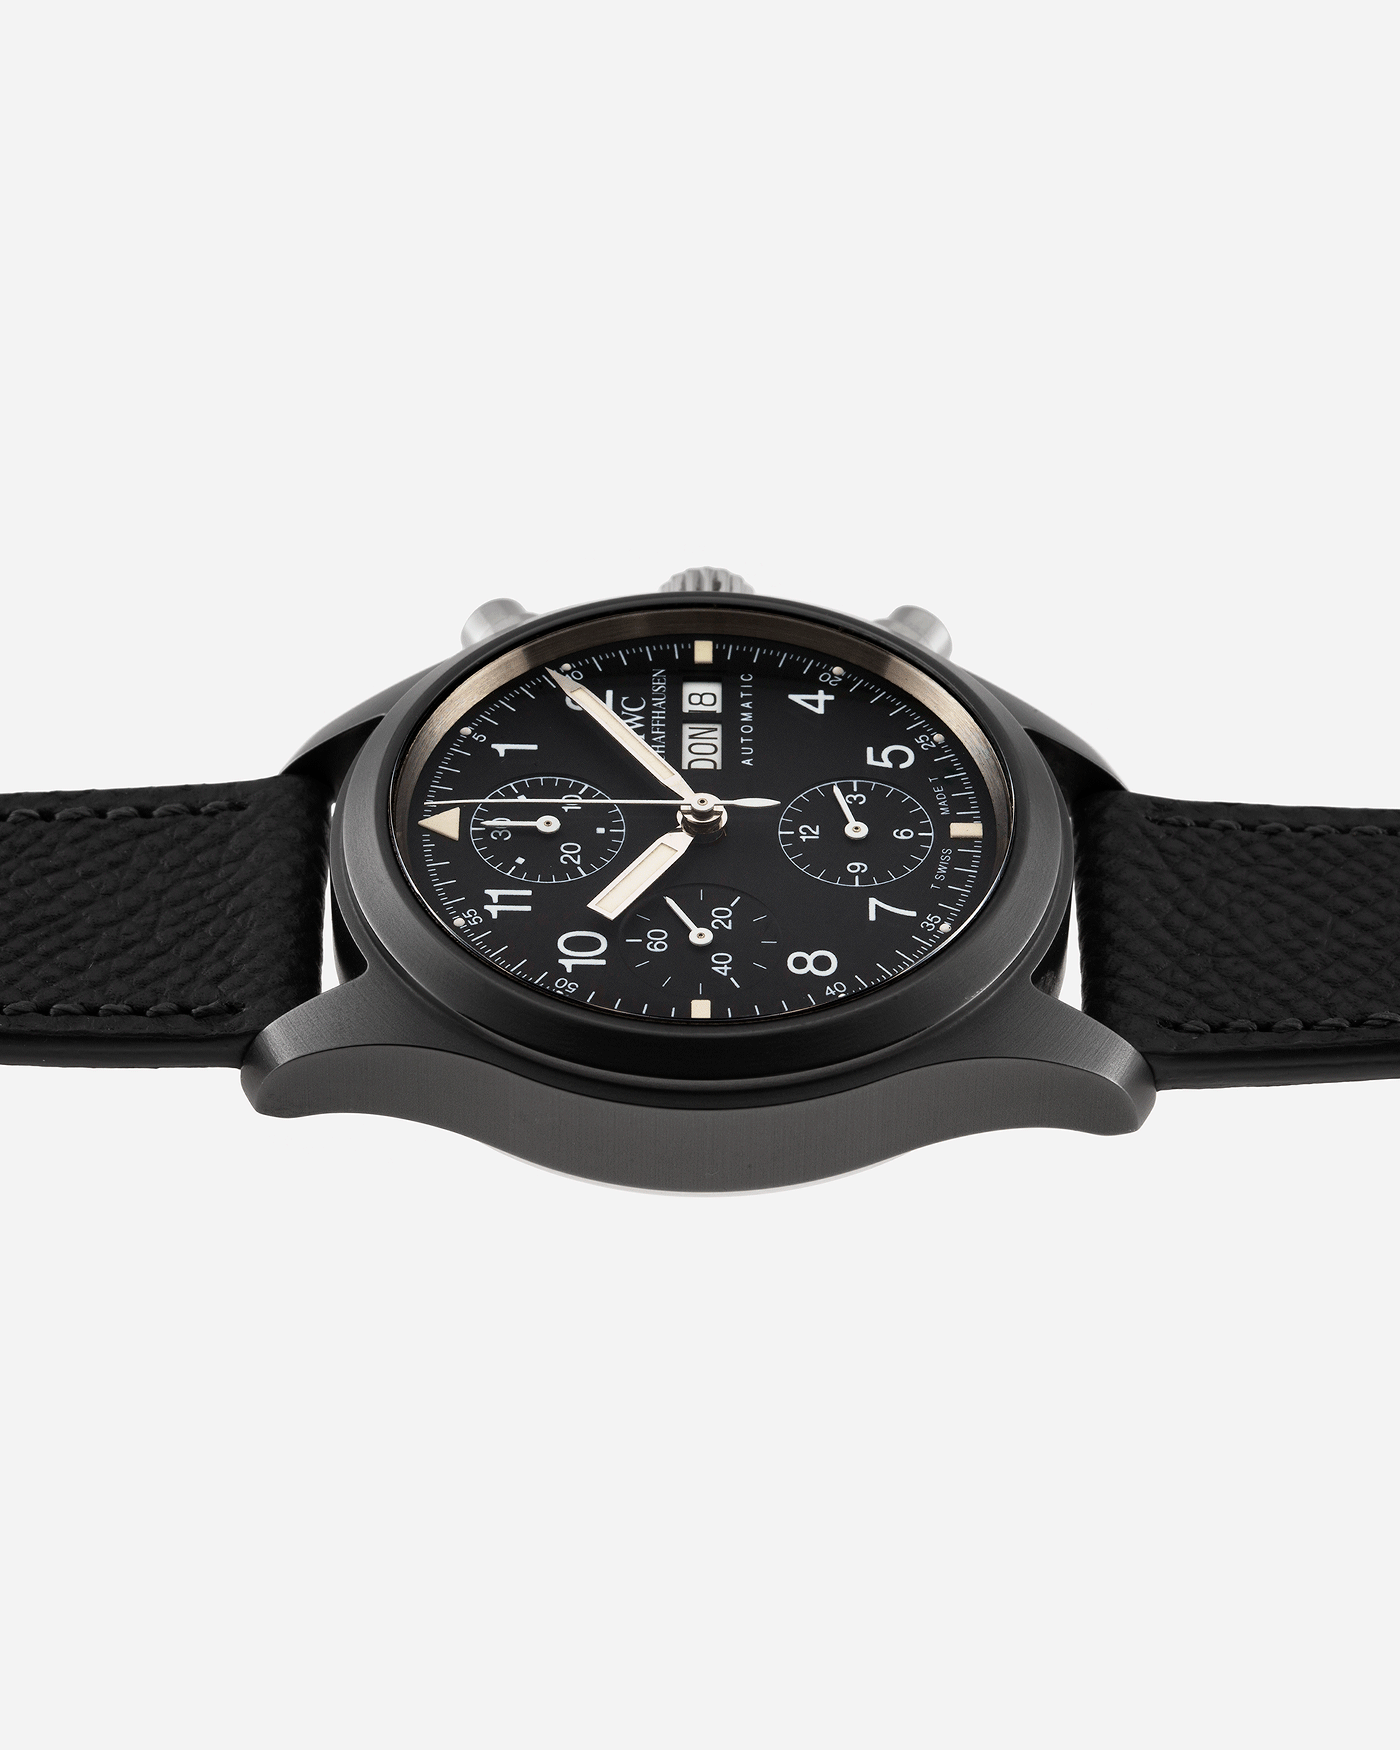 Brand: IWC Year: 1990s Model: Ceramic Fliegerchronograph Reference Number: 3705 Material: Ceramic and Stainless Steel Movement: Valjoux cal. 7750 Case Diameter: 39mm Bracelet/Strap: Molequin Anthracite Grained Calf with Stainless Steel IWC Tang Buckle